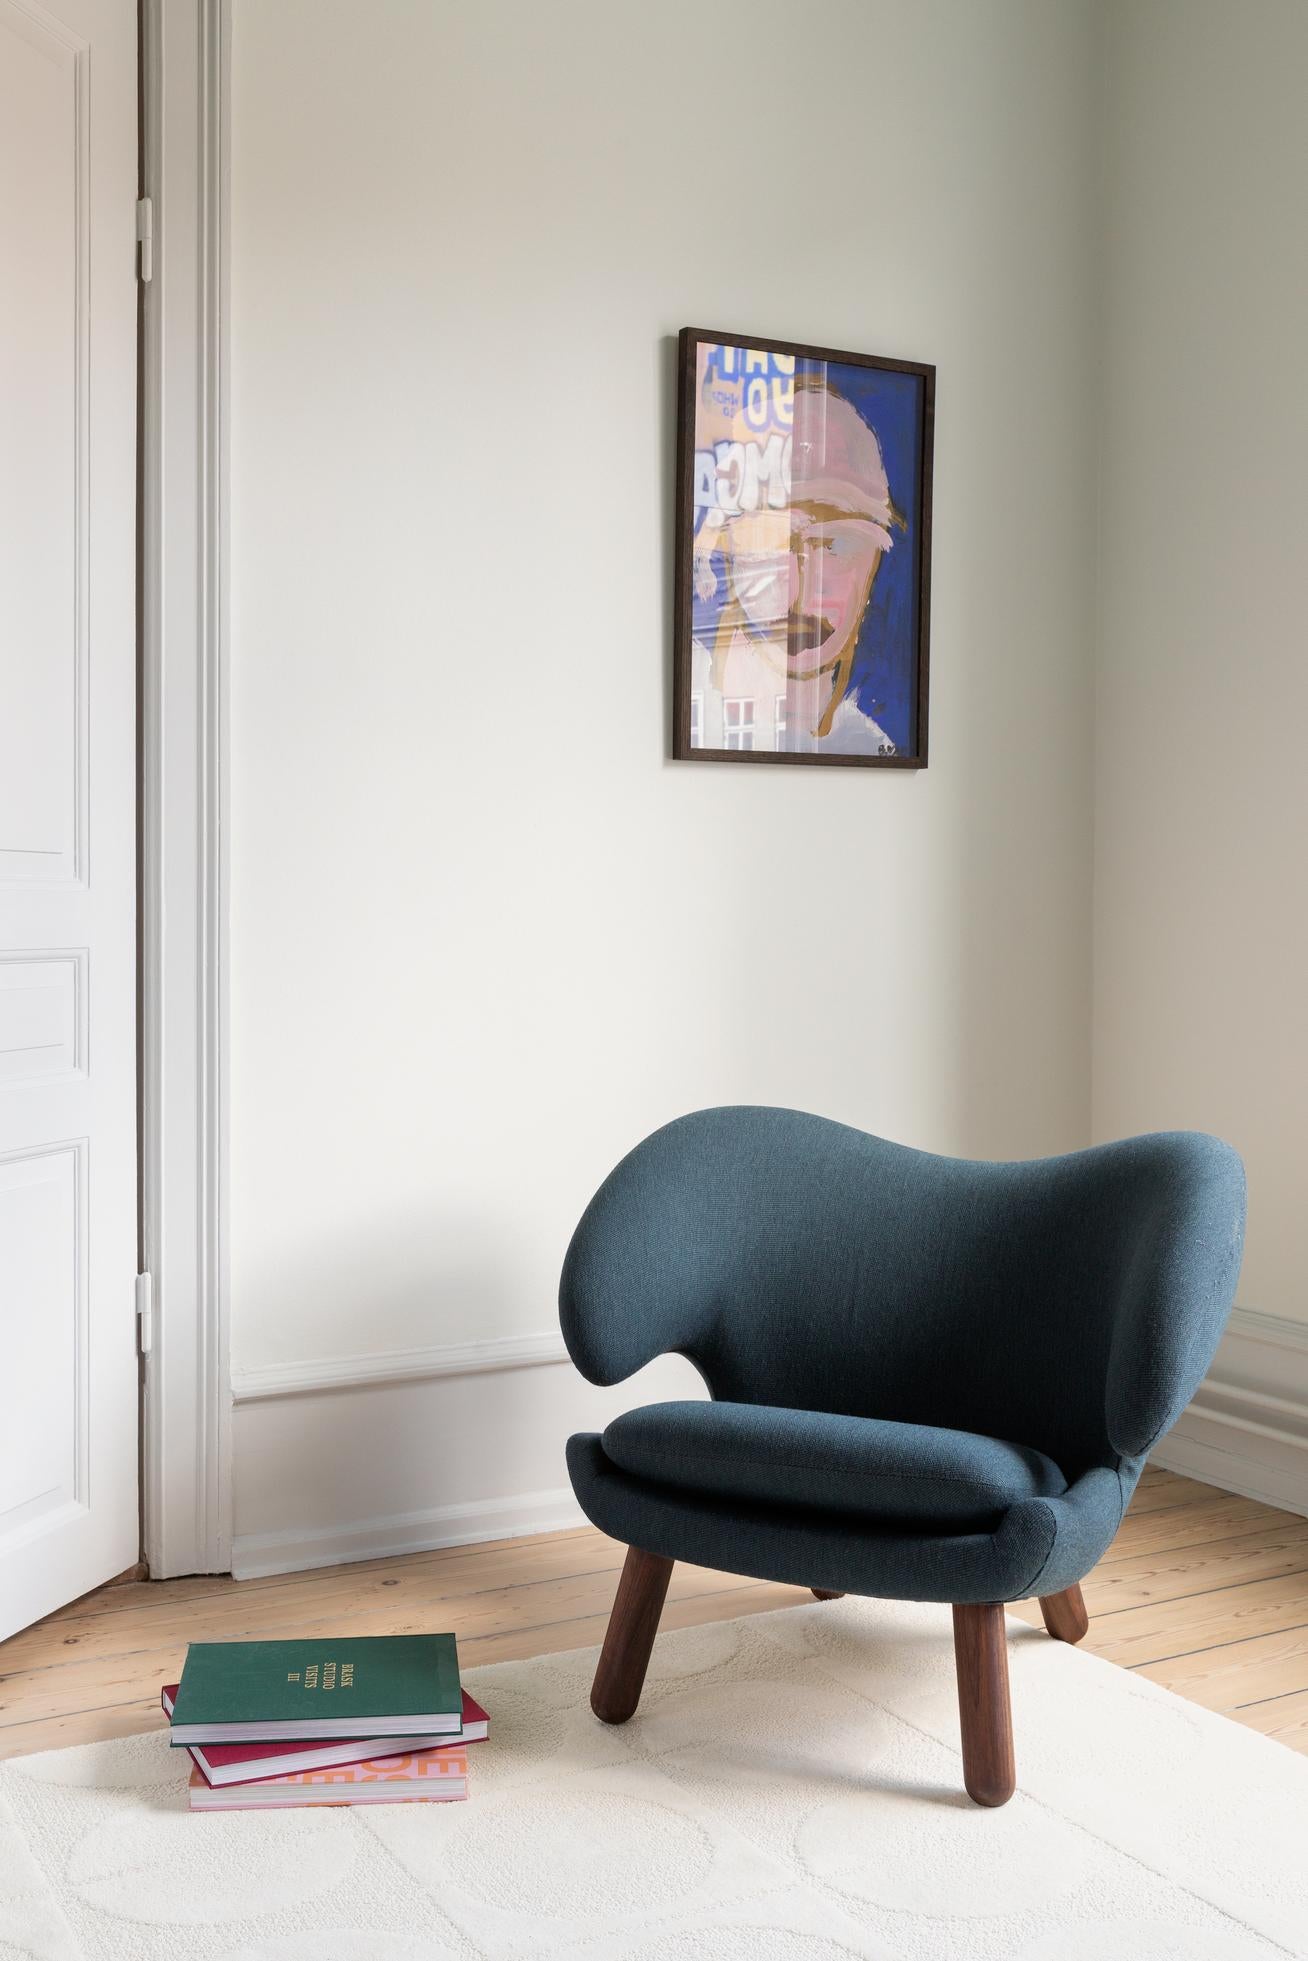 Finn Juhl Pelican Chair Upholstered in Wood and Fabric 7